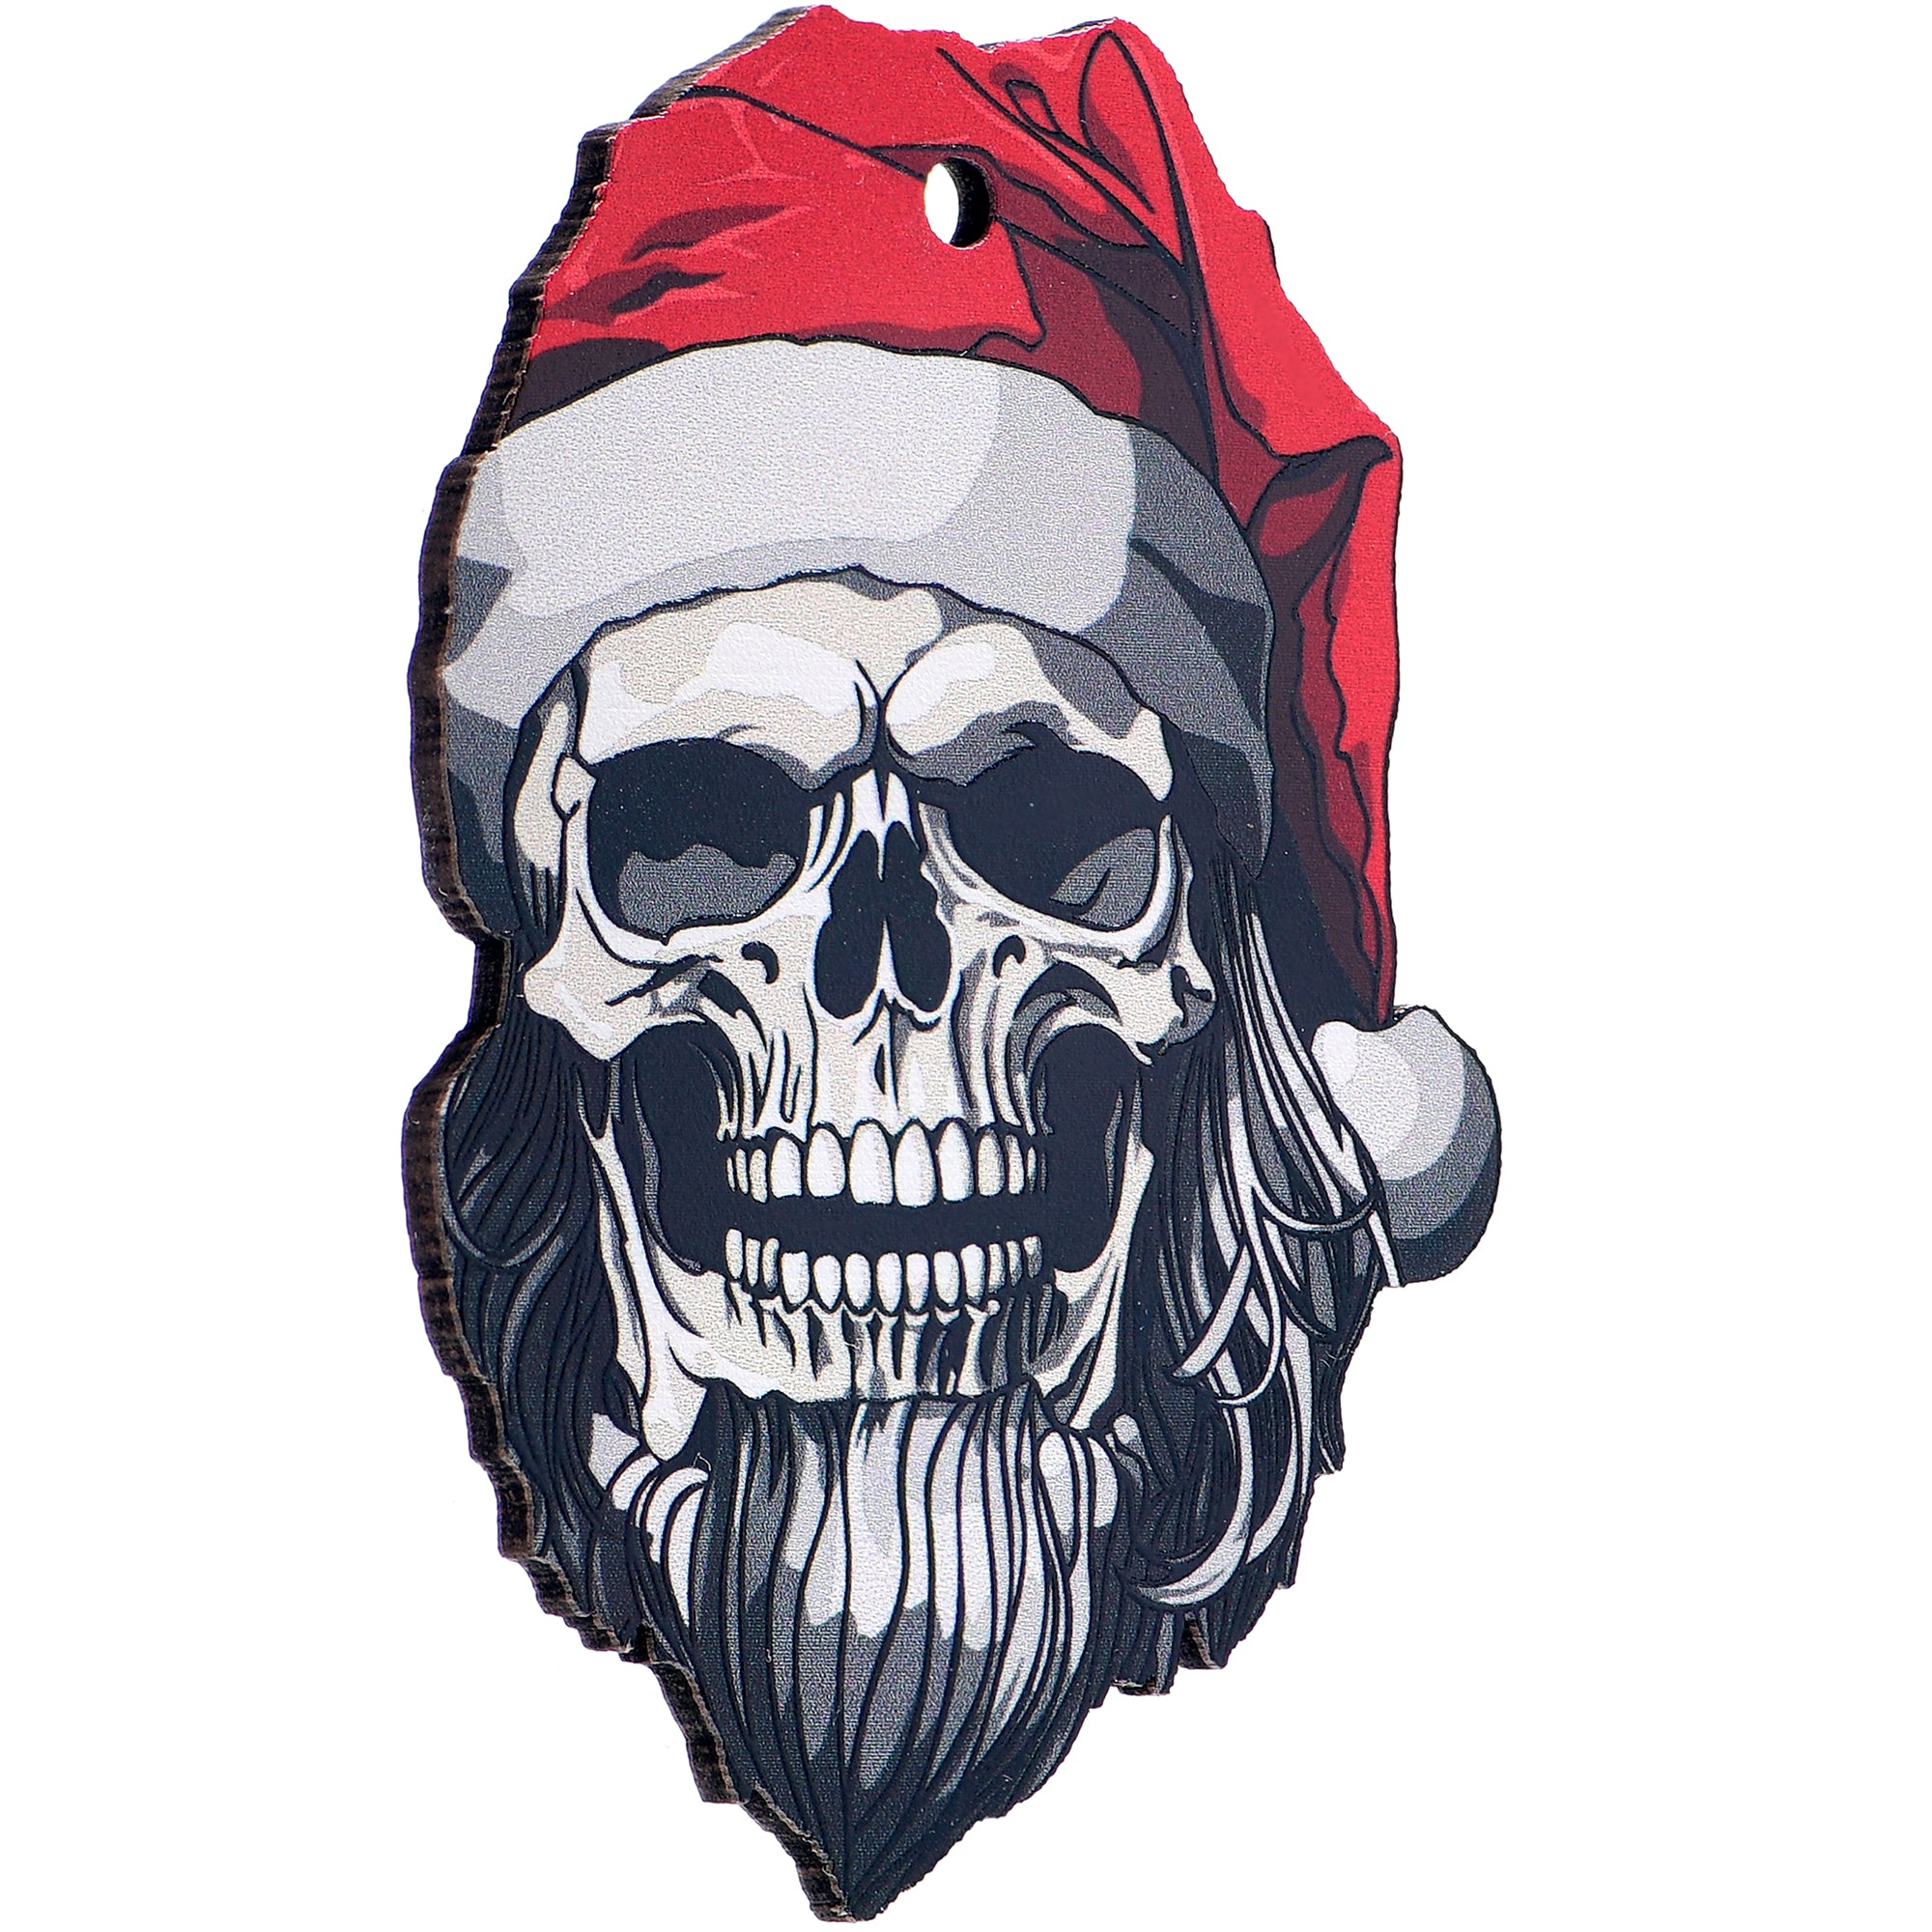 Wood Holiday Skeleton Claus Christmas Ornament